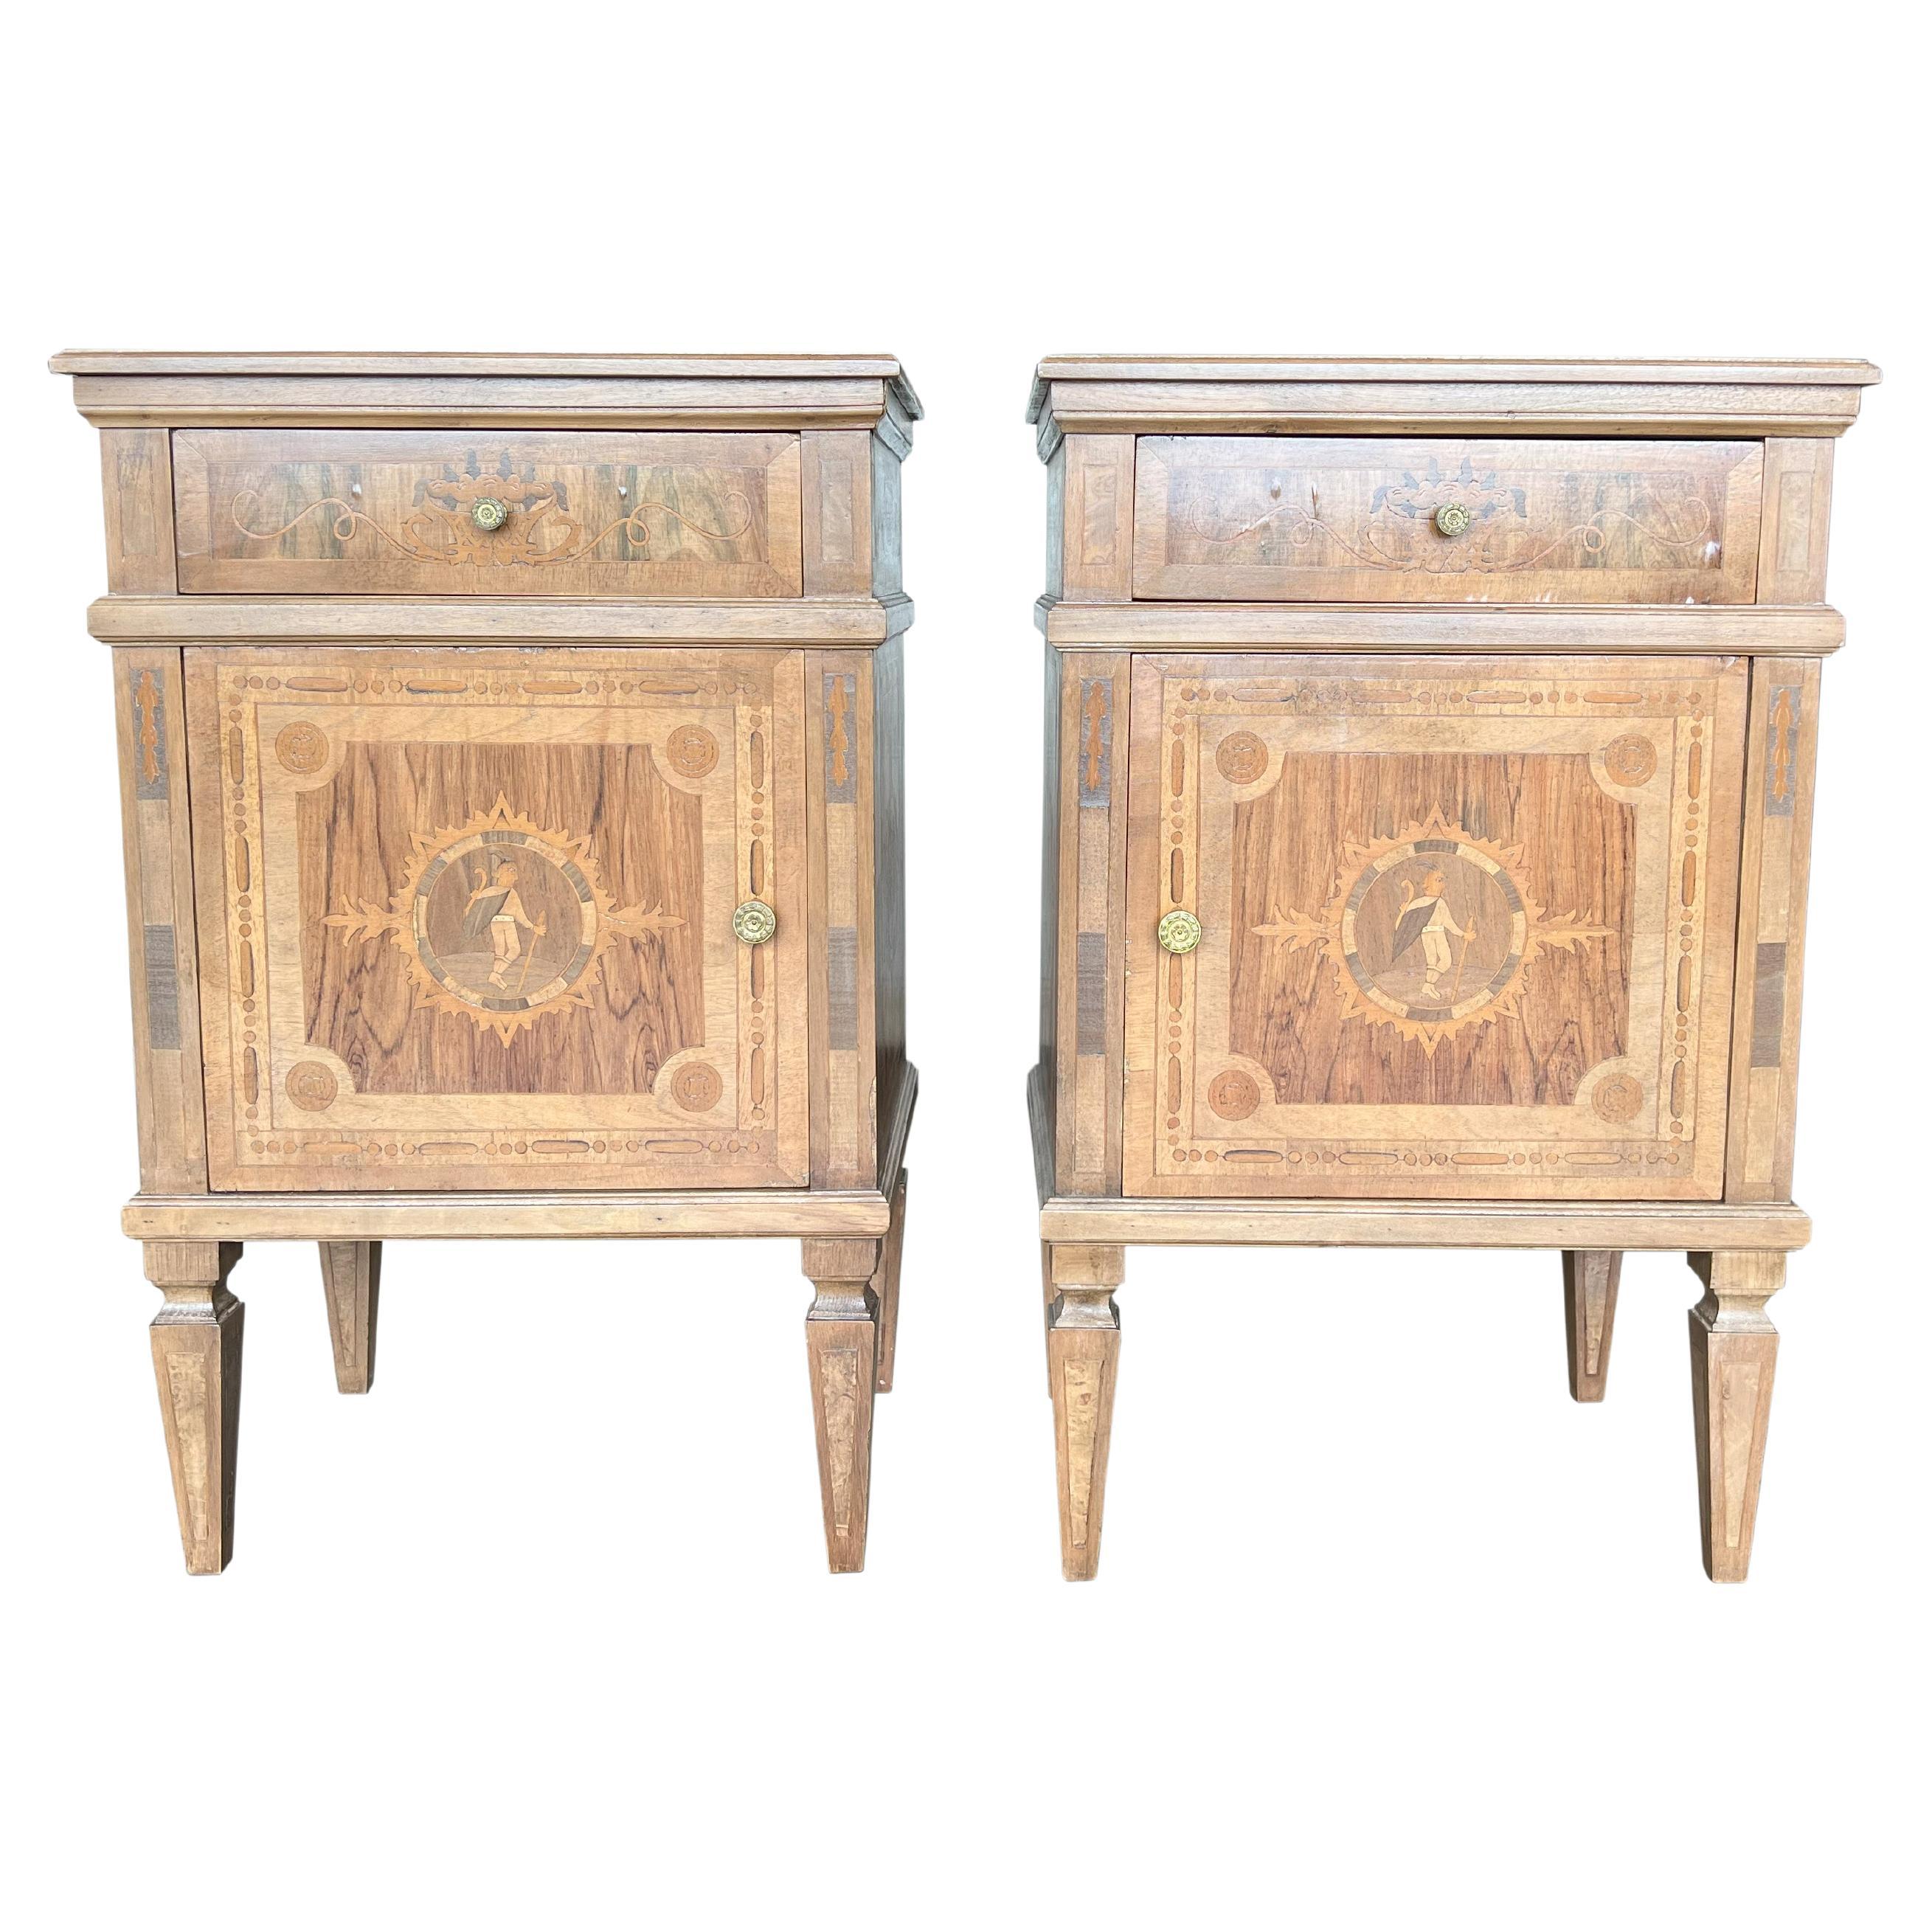 Louis XVI Style Tuscan Italian Walnut Nightstand Pair with Inlay Marquetry   For Sale